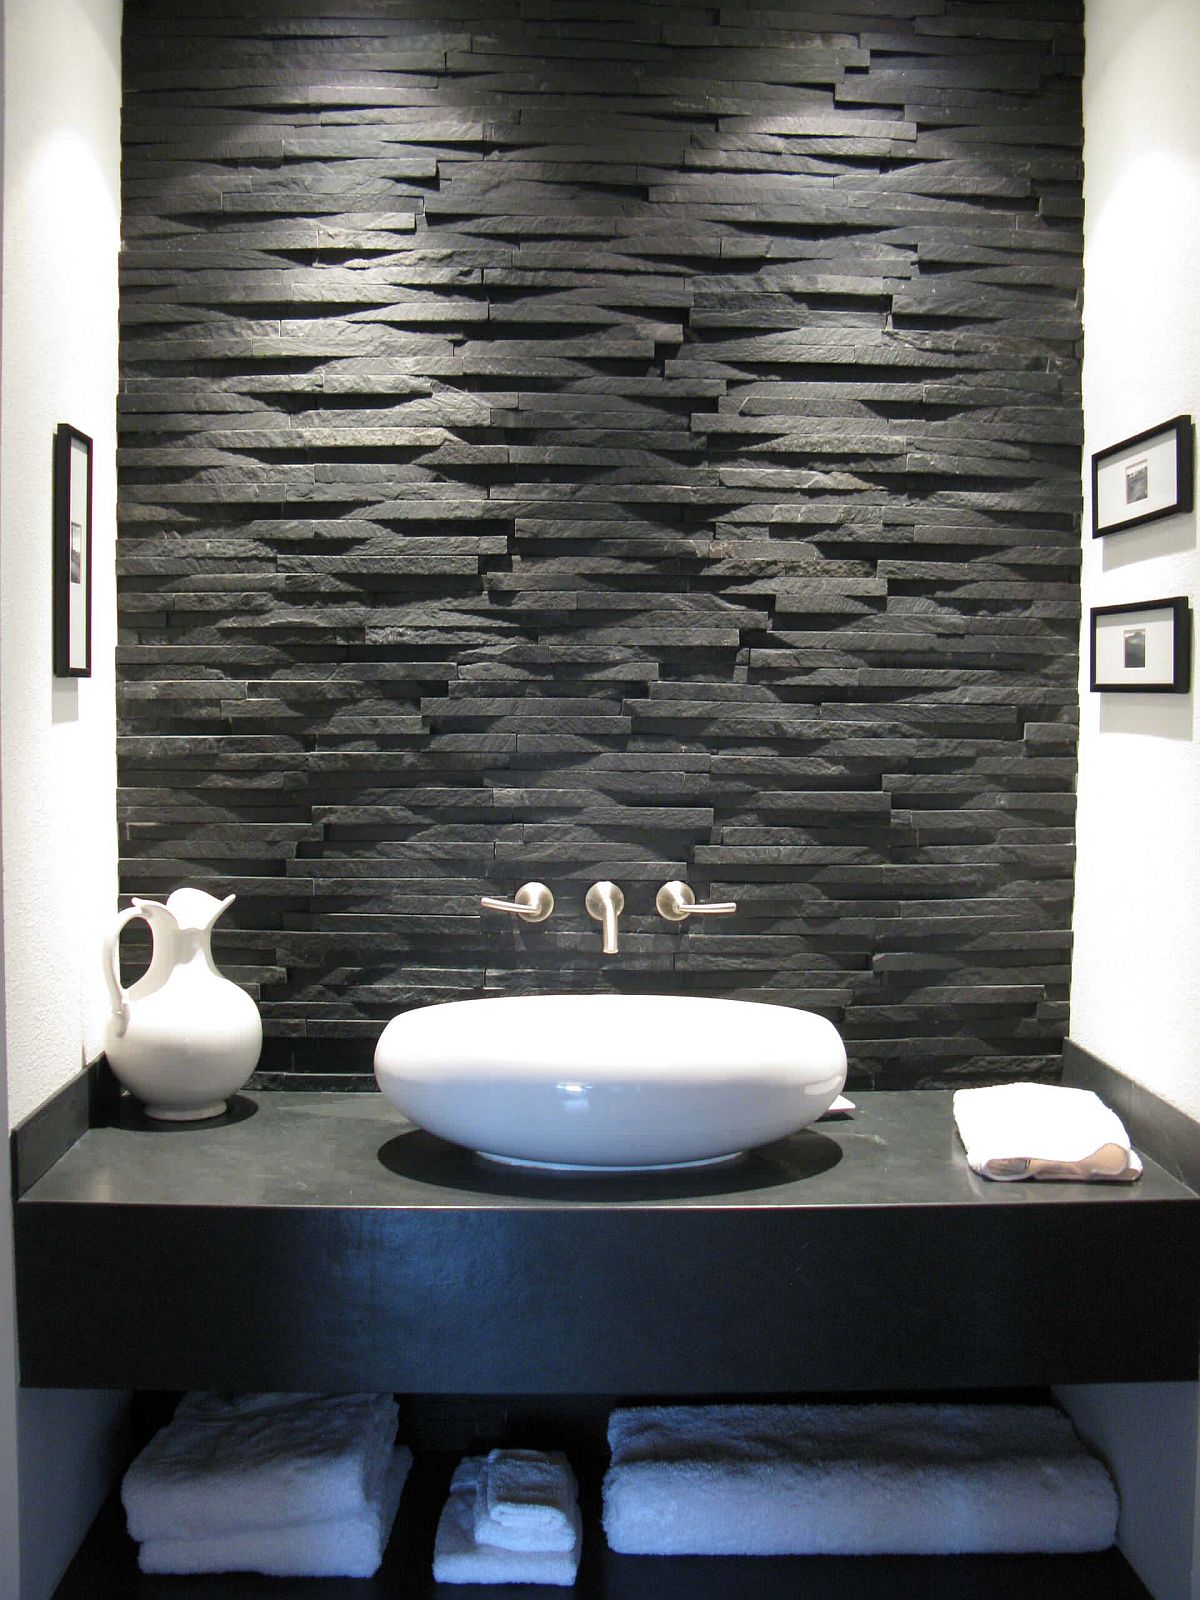 Black-slate-is-used-to-shape-both-the-backsplash-and-the-vanity-in-this-small-modern-bathroom